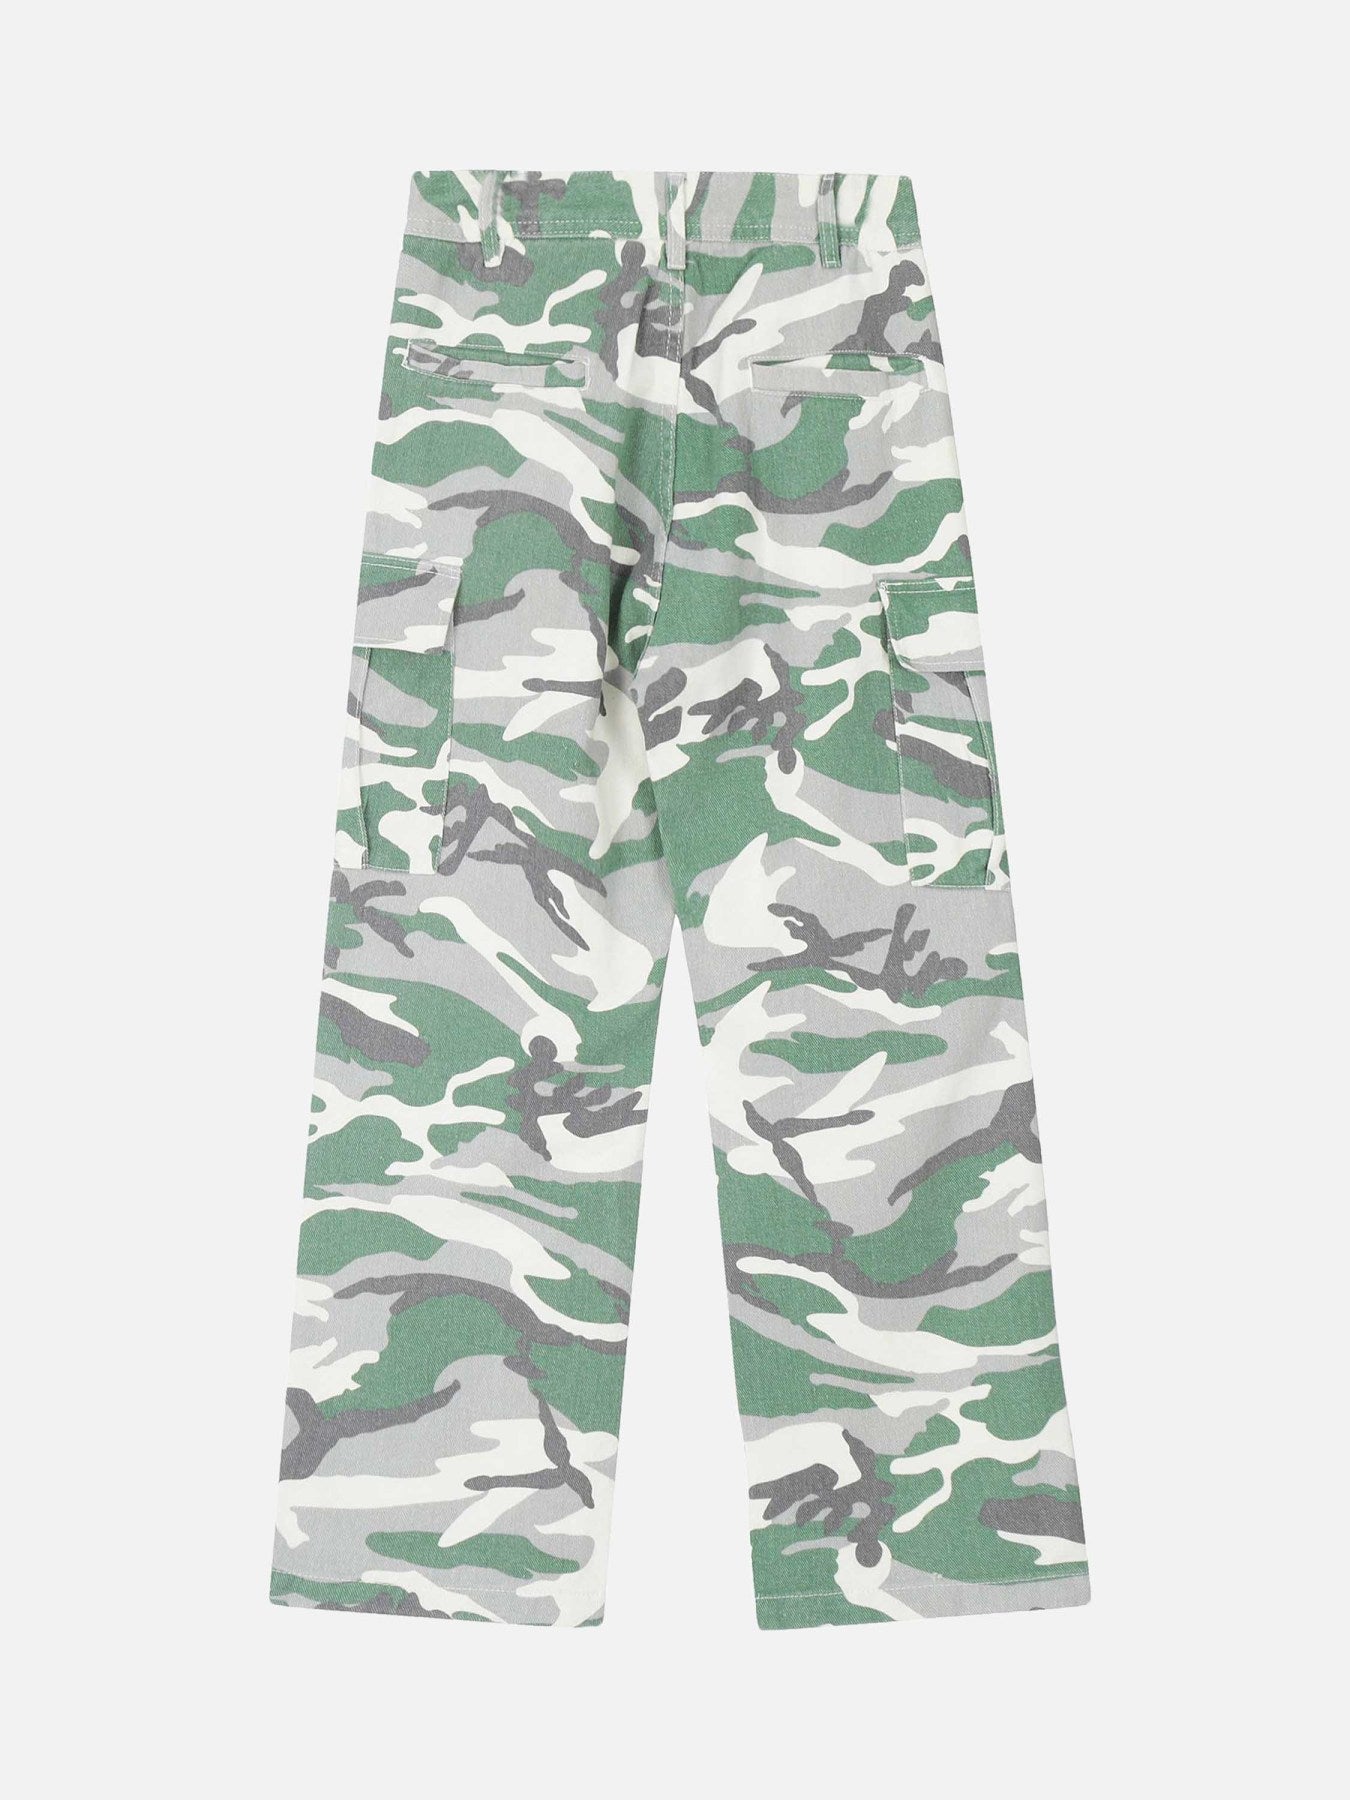 The Supermade American Monogrammed Camouflage Pants - 1693